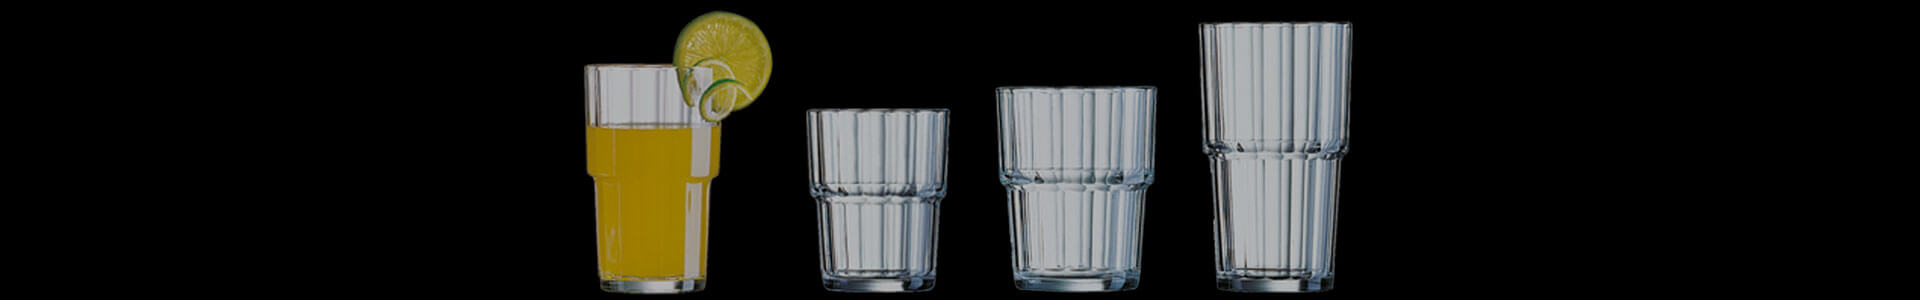 Glasses from the Norvege series by Arcoroc in various sizes.